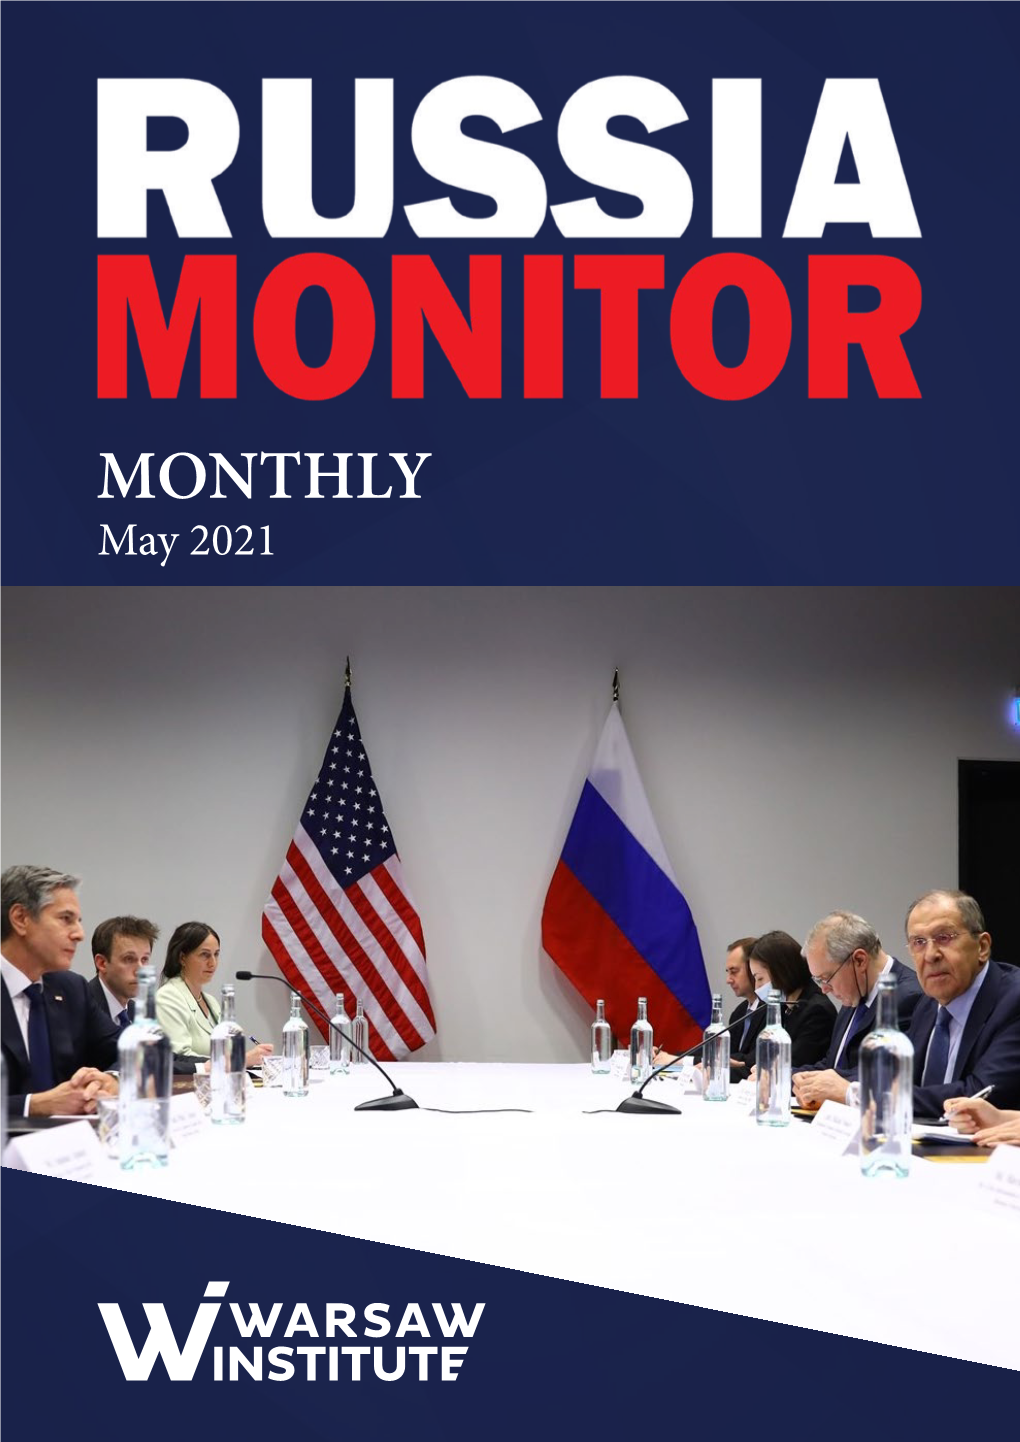 MONTHLY May 2021 CONTENTS